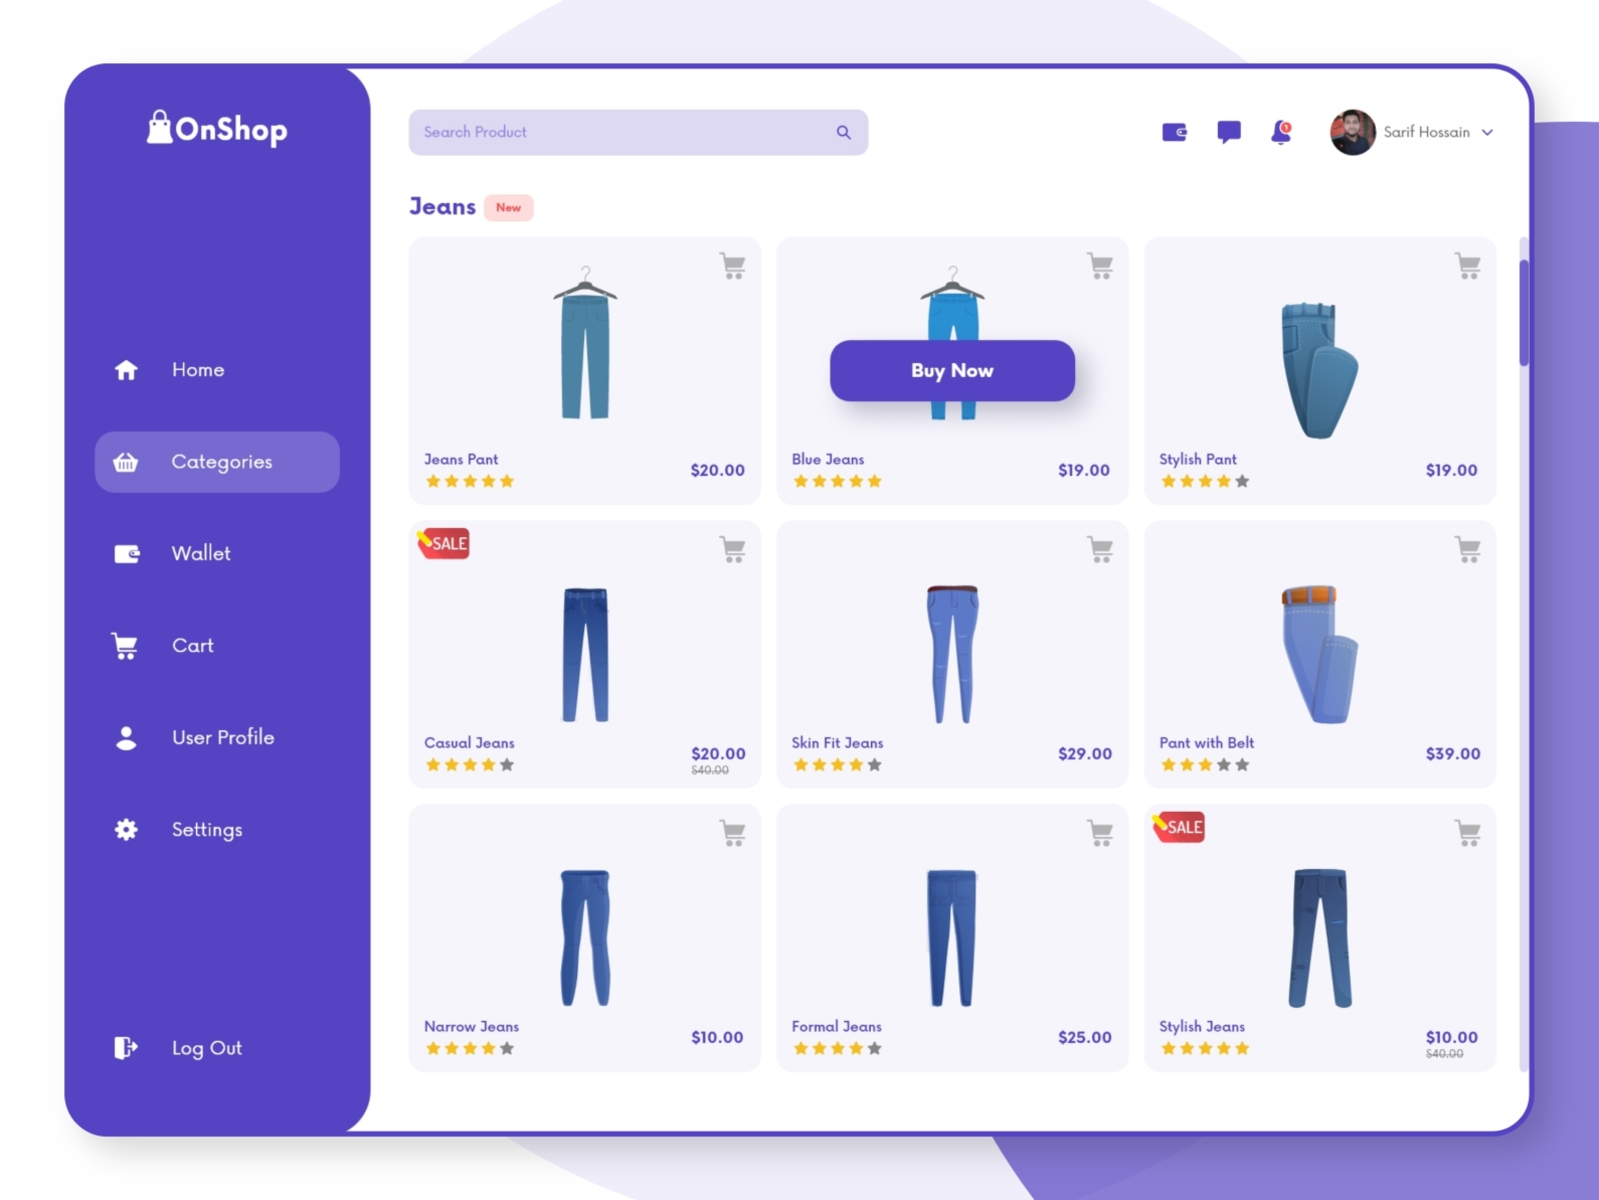 Product Page screen design idea #10: OnShop-Product Page Design